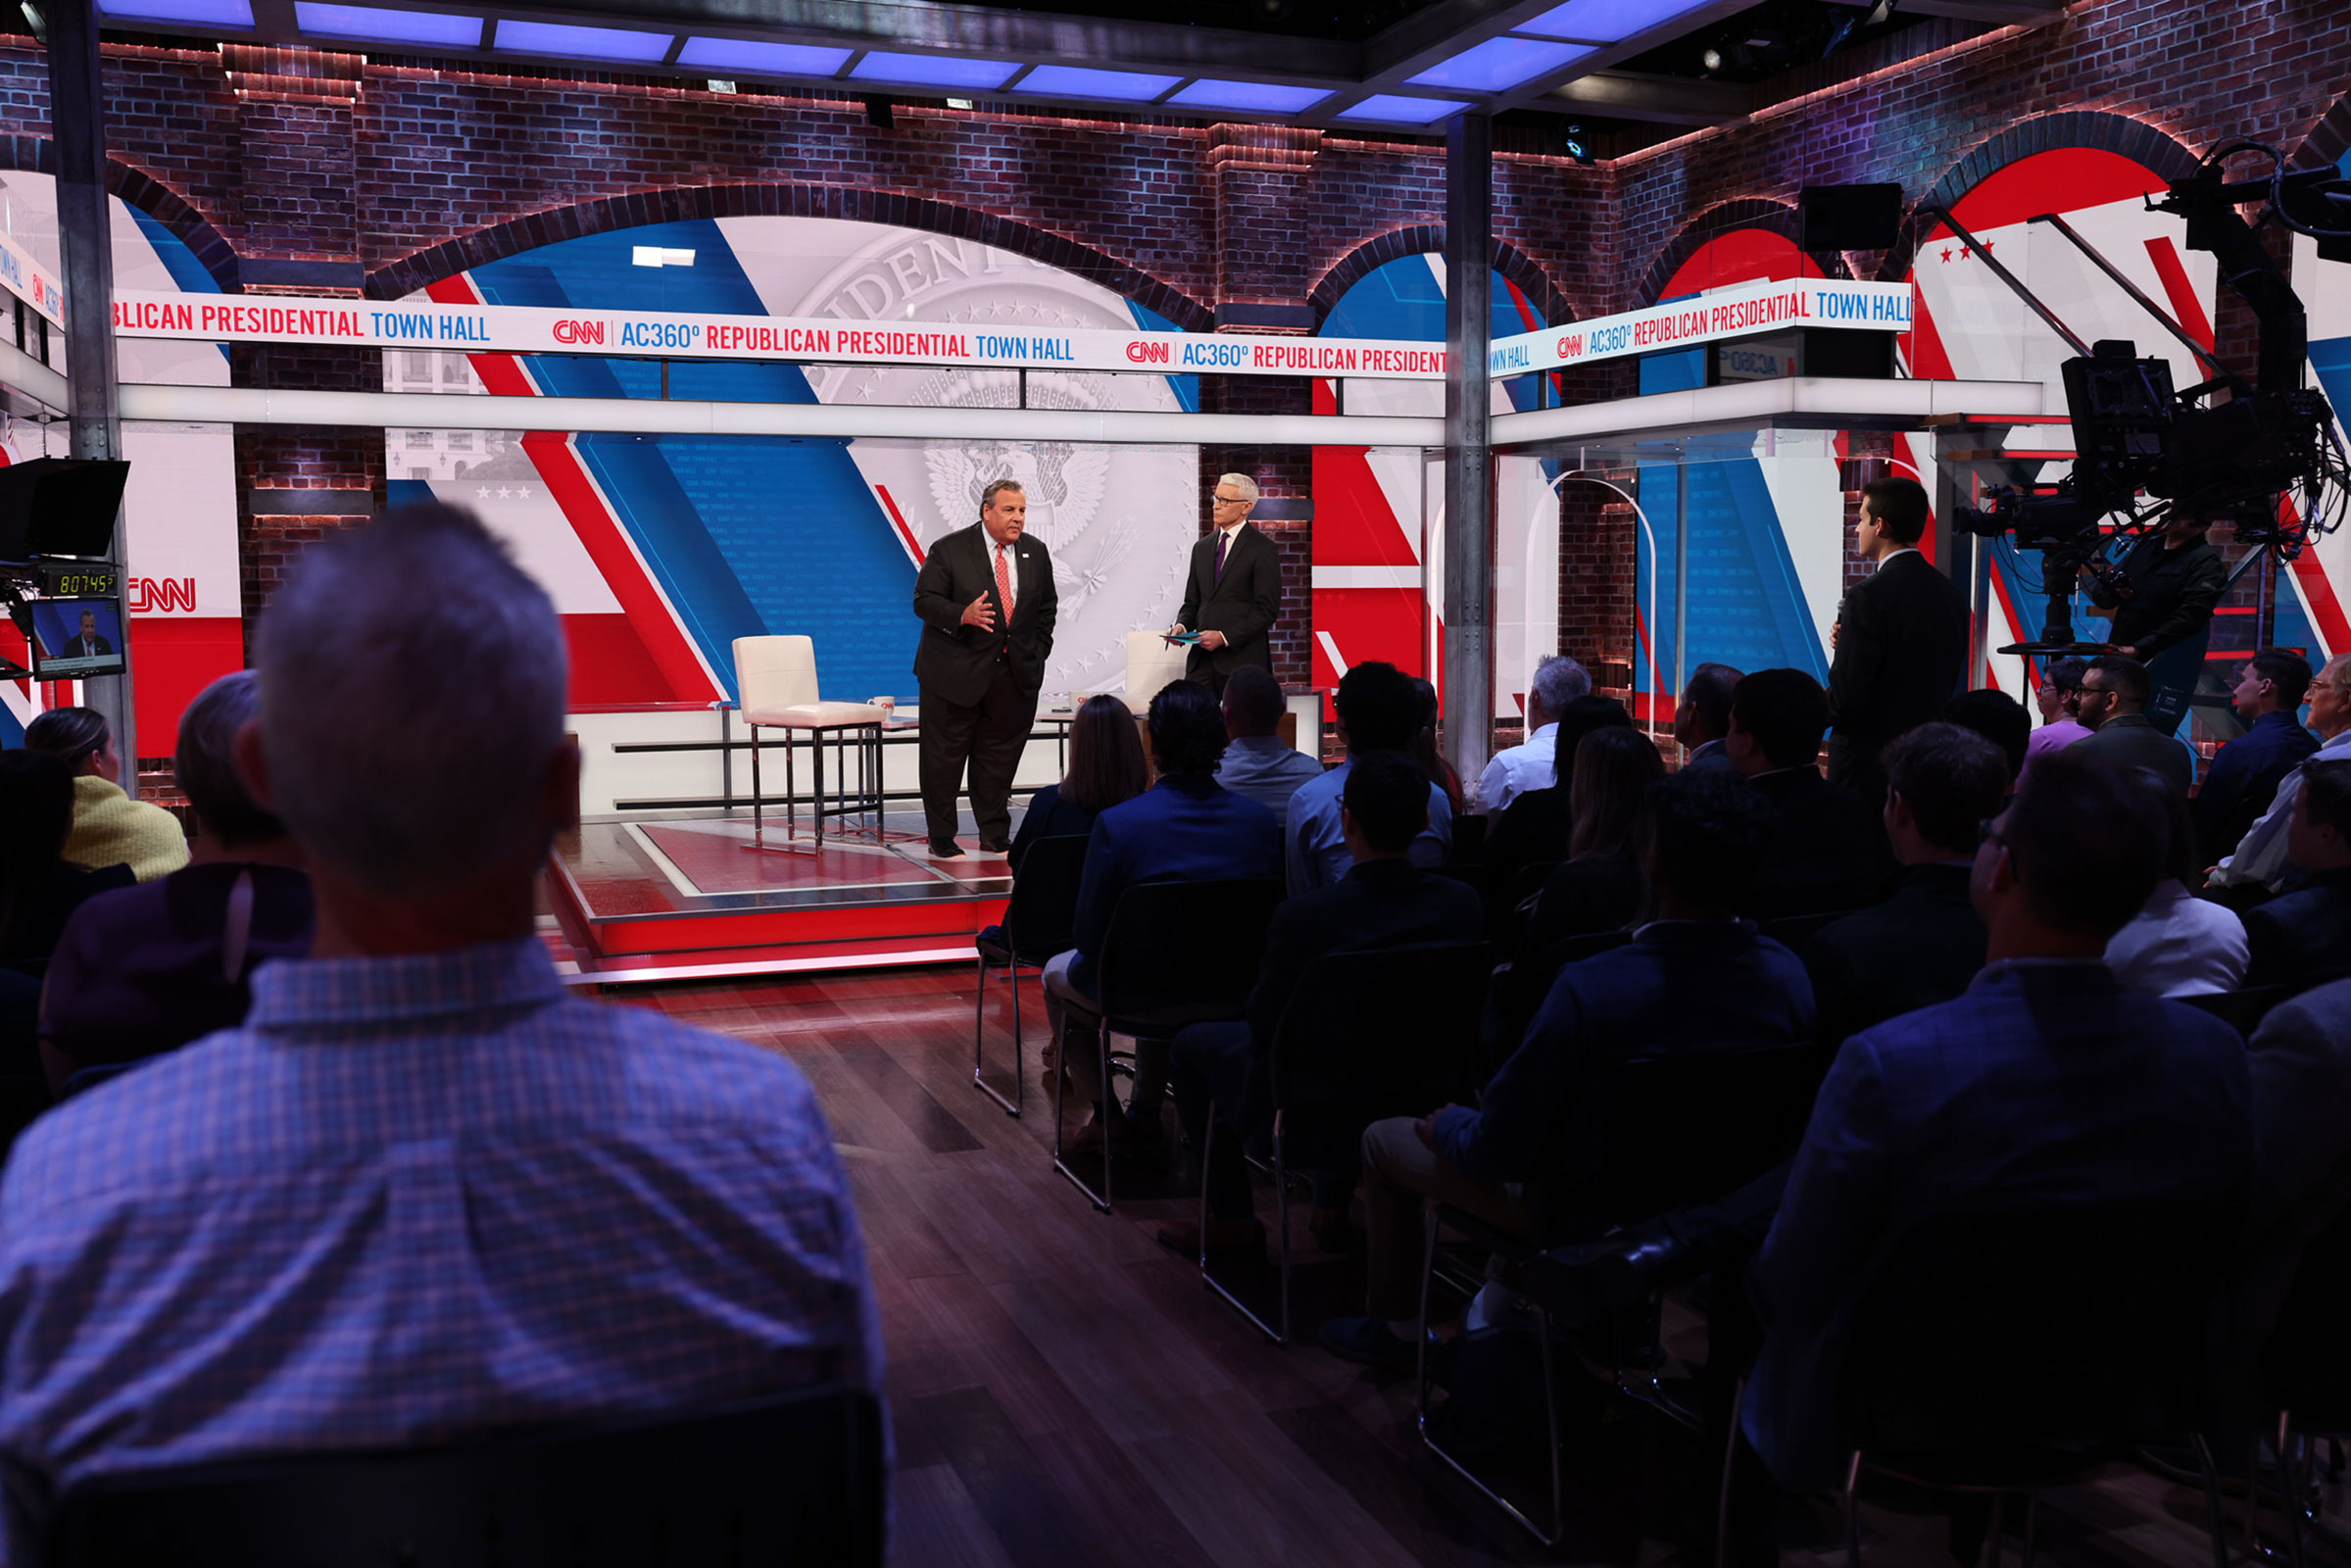 Former New Jersey Gov. Chris Christie speaks at CNN Republican Presidential Town Hall moderated by CNN’s Anderson Cooper in New York on Monday, June 12.